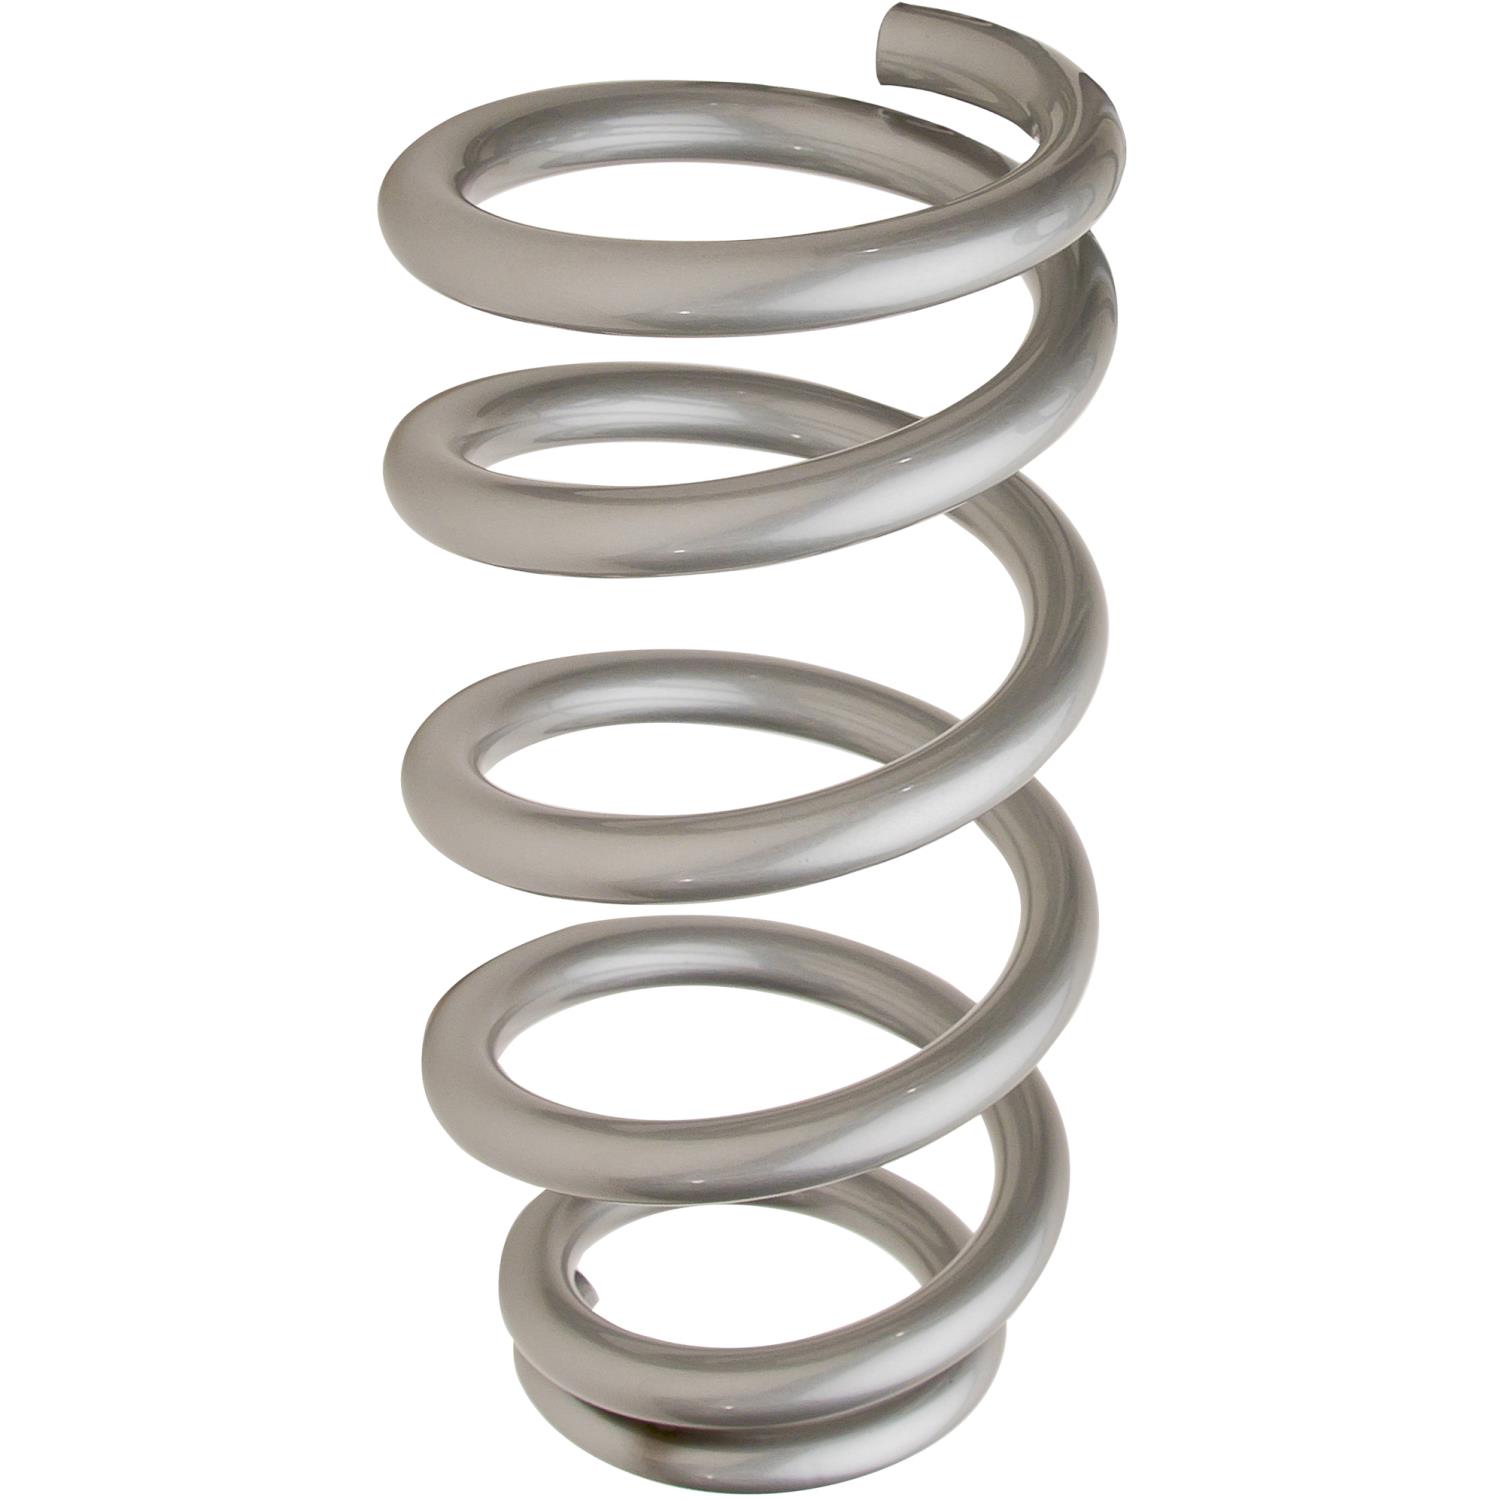 Variable Rate High-Tensile Spring 12"